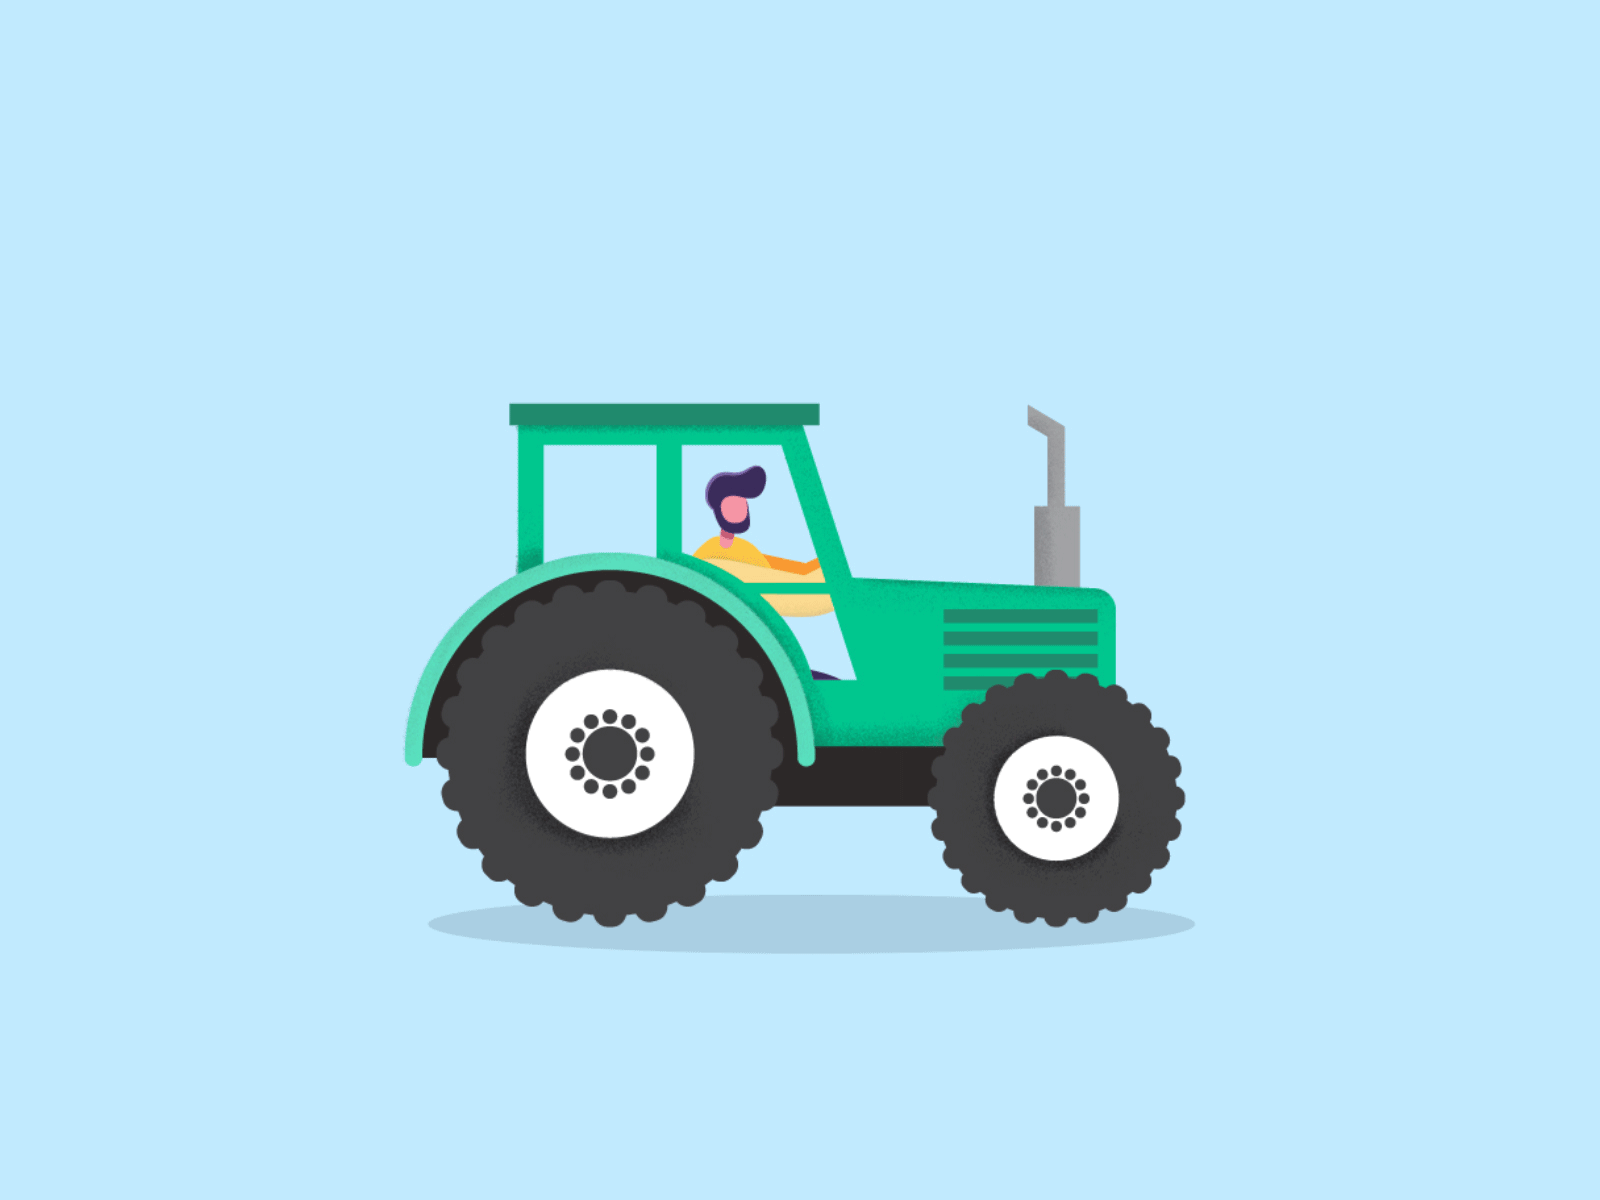 Tractor Animation by Jonathan Silverberg for D Custom on Dribbble